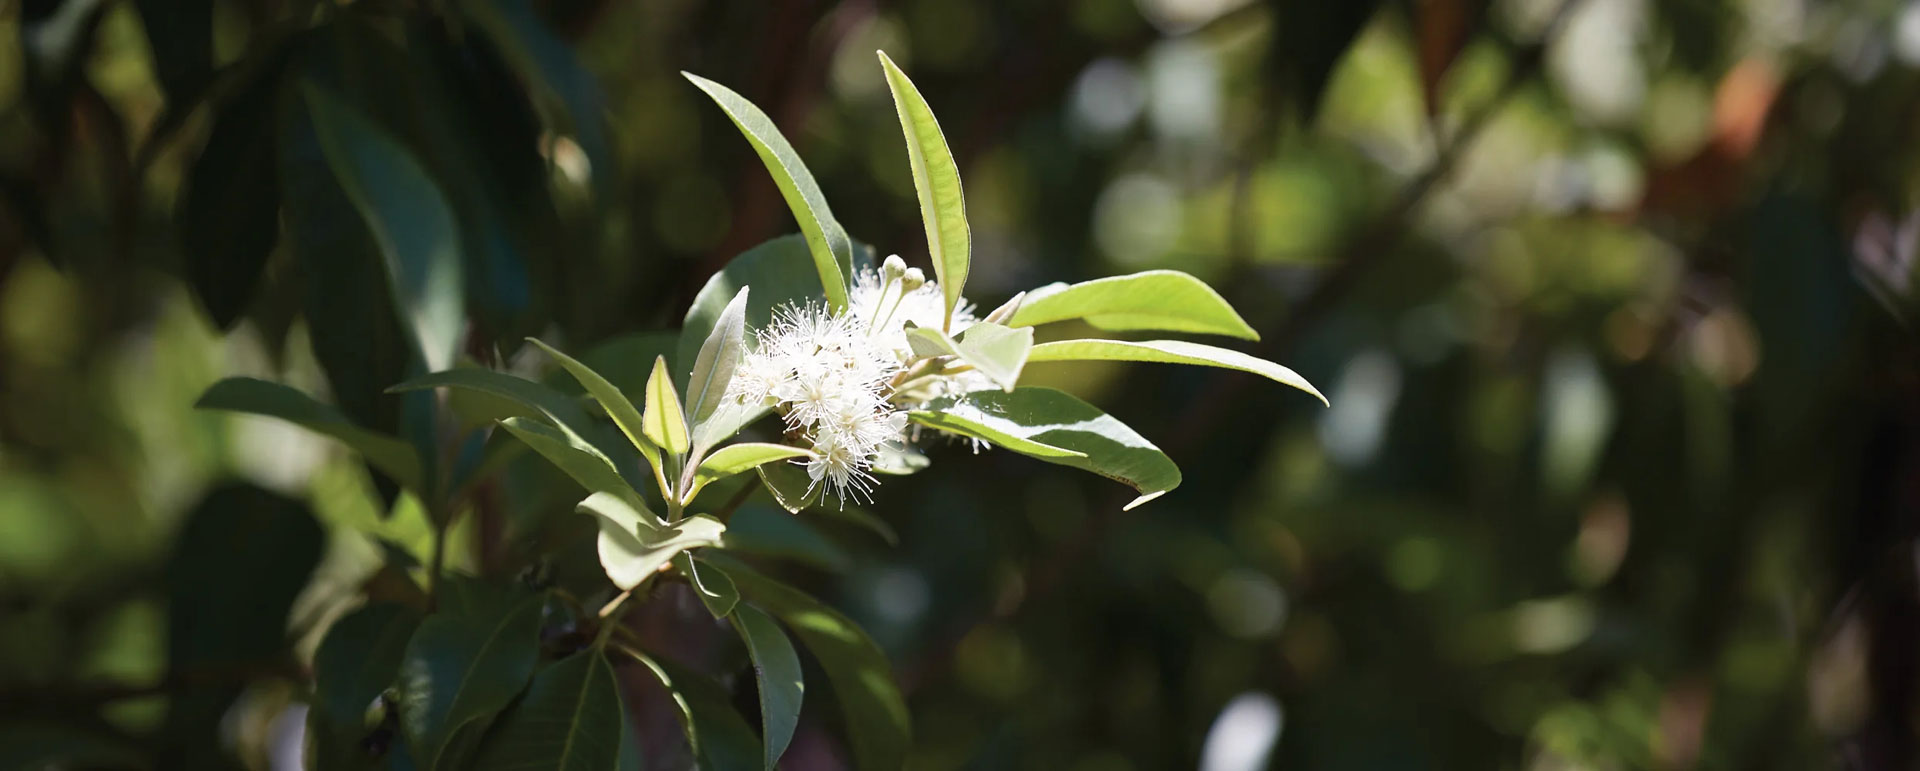 Culinary and Medicinal Uses of Lemon Myrtle